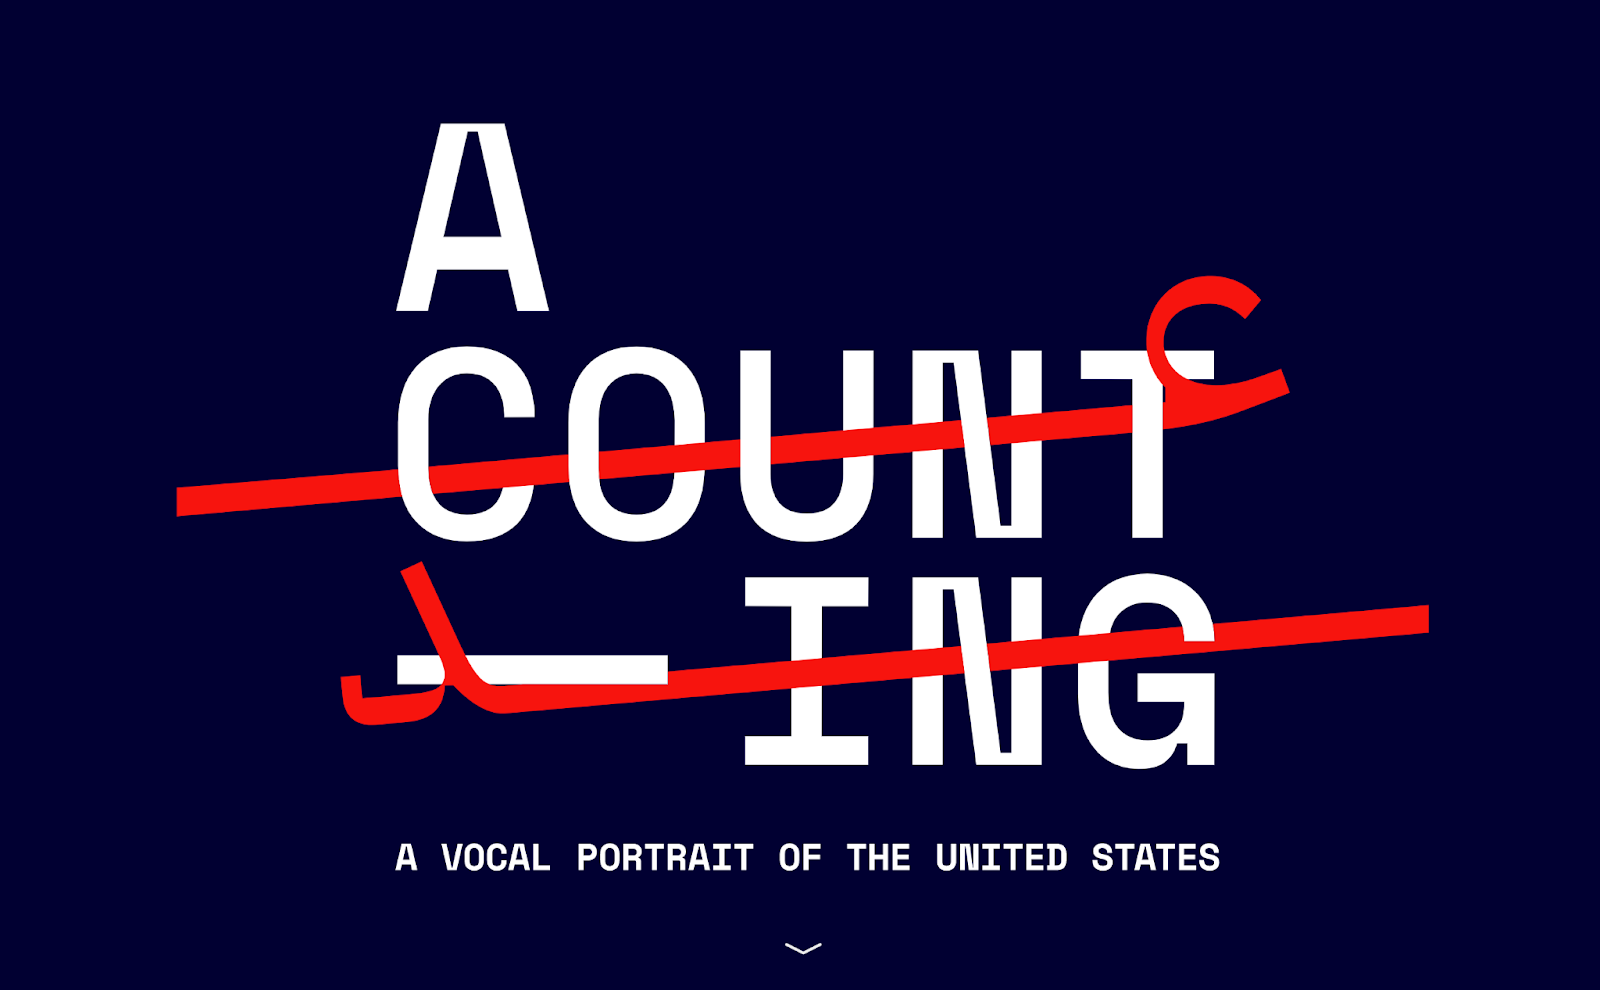 A title image that says A Counting with a thread running through it with the subtitle "A vocal portrait of the united states"